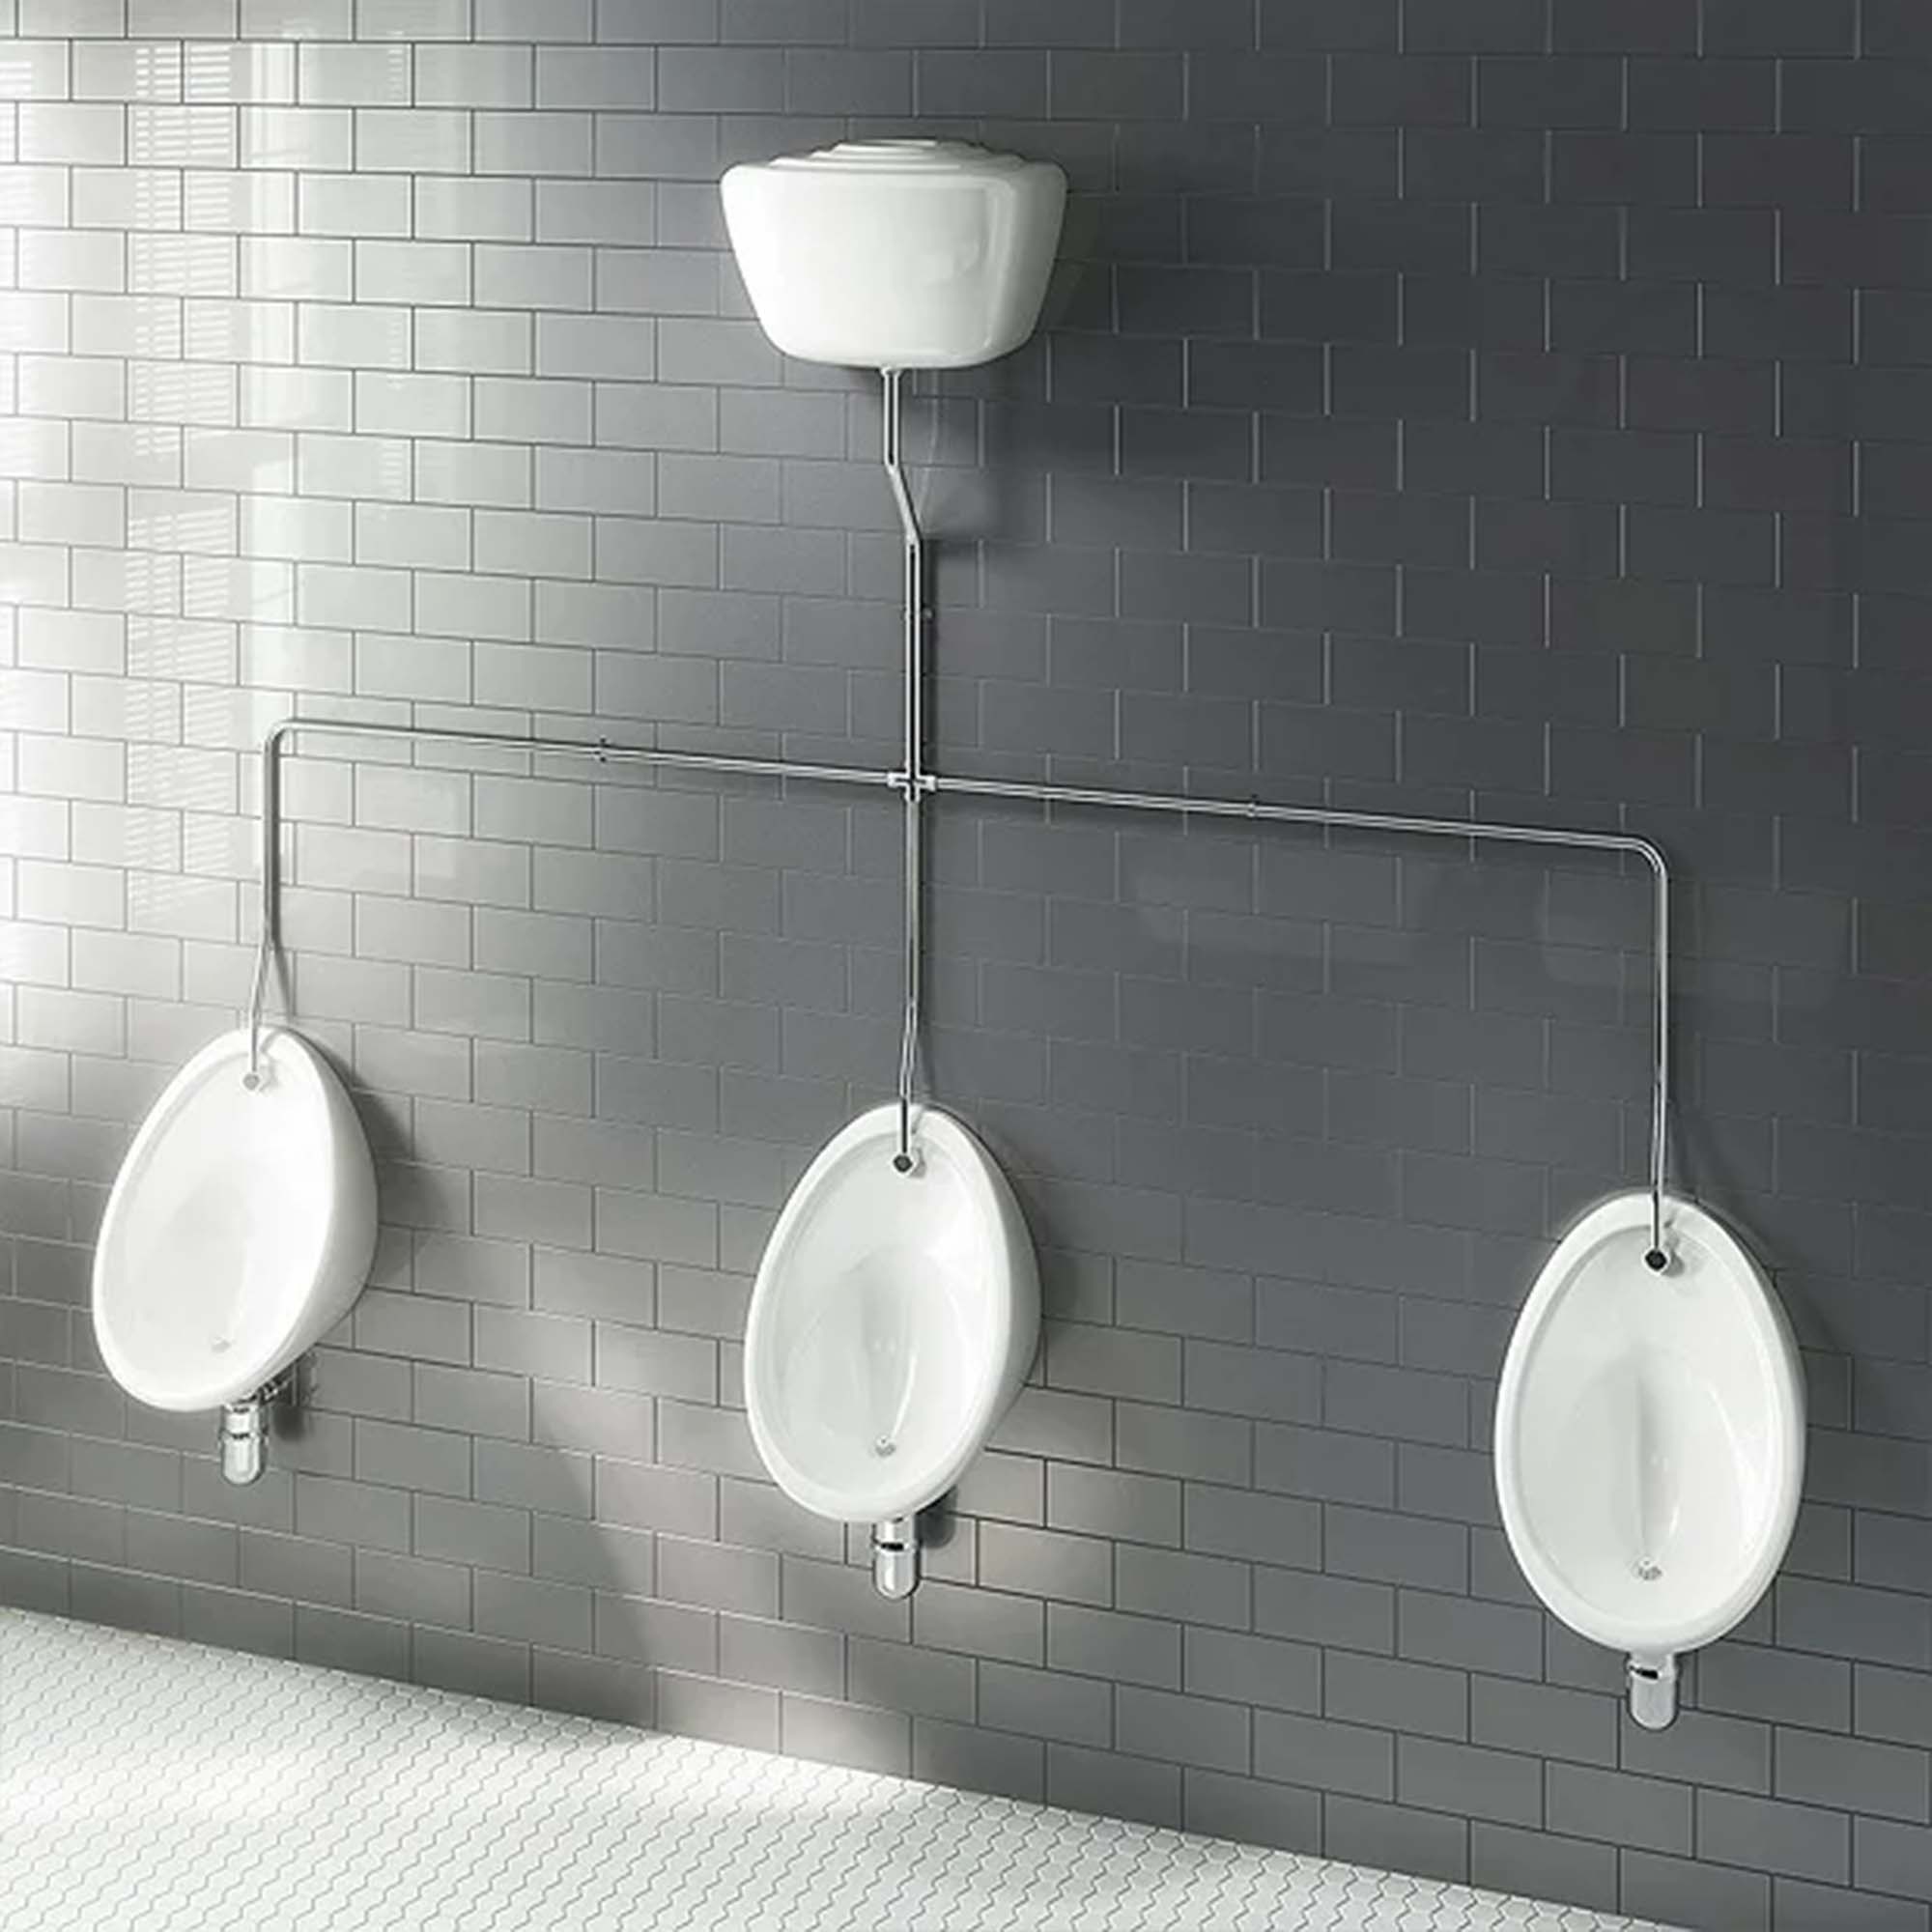 exposed urinal pack 3x500mm urinal bowls with 9l ceramic cistern